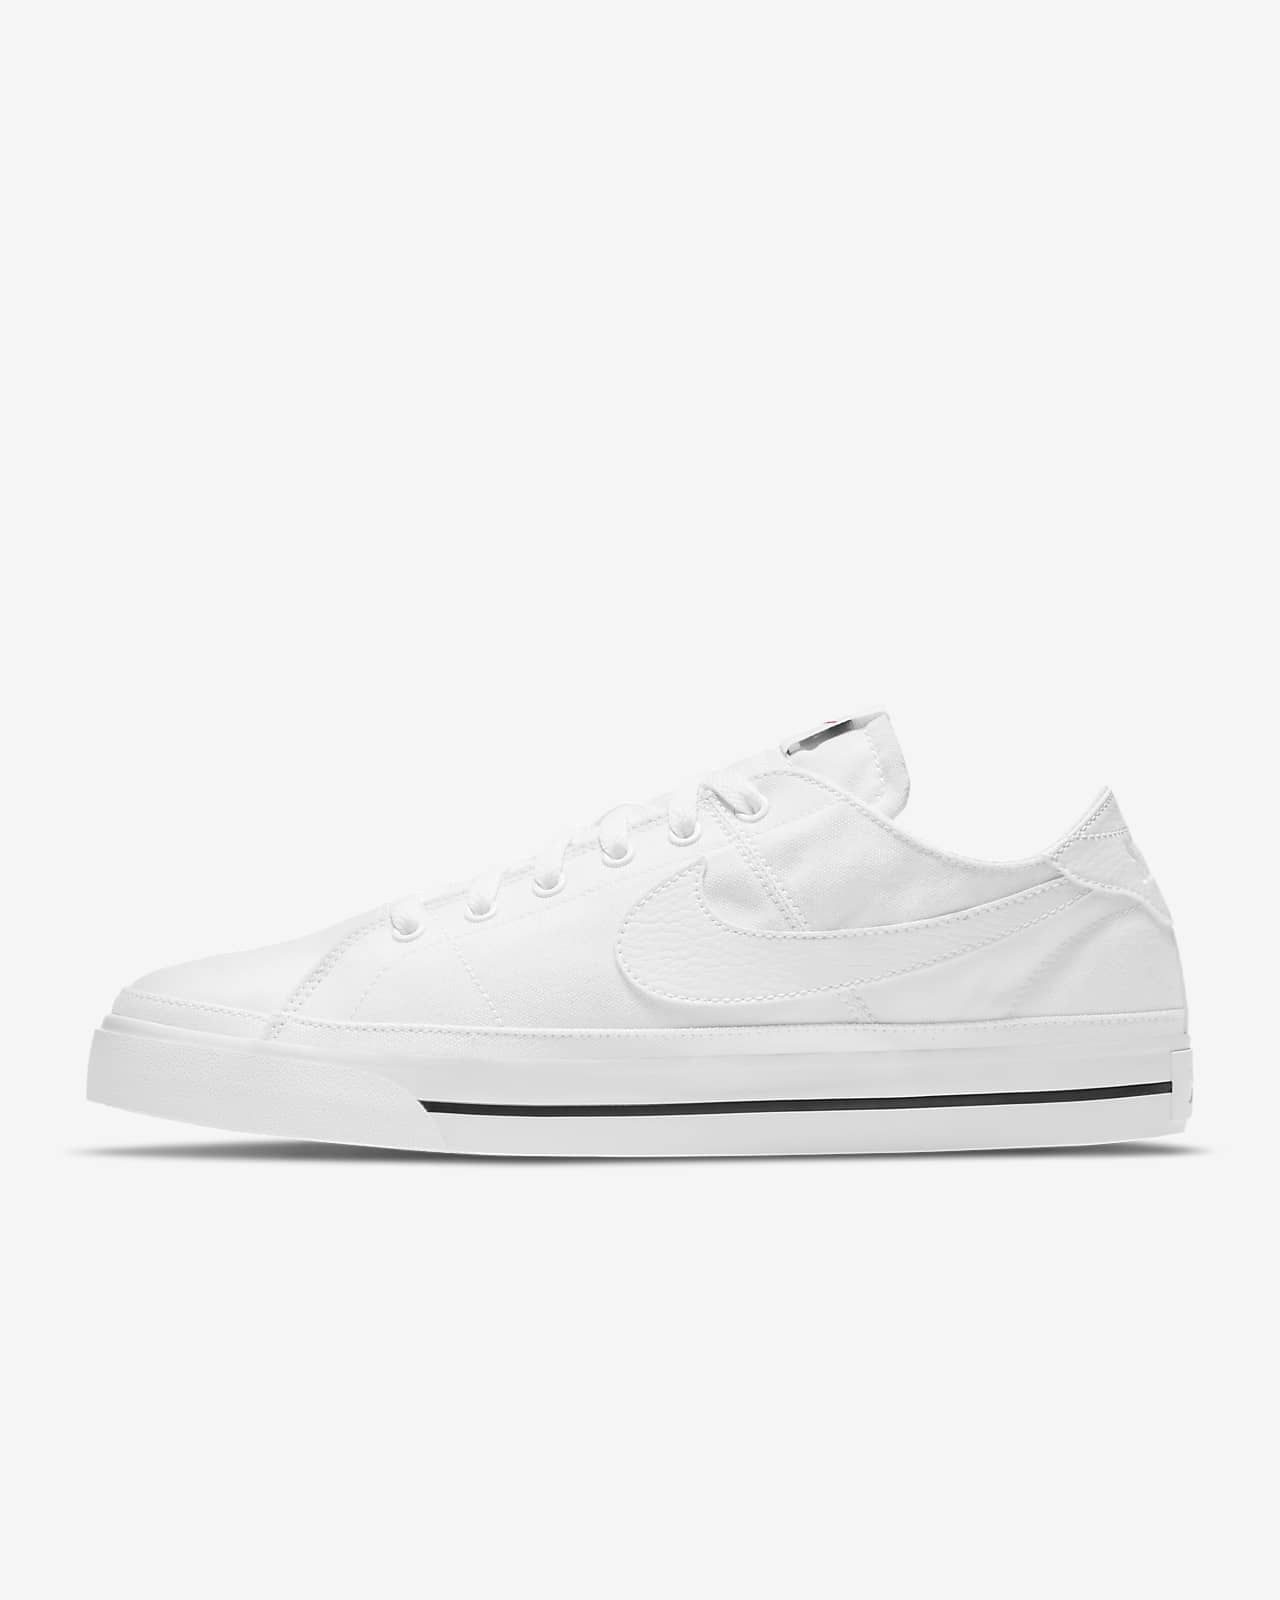 Nike Court Legacy CanvasMen's Shoes$60 | Nike (US)